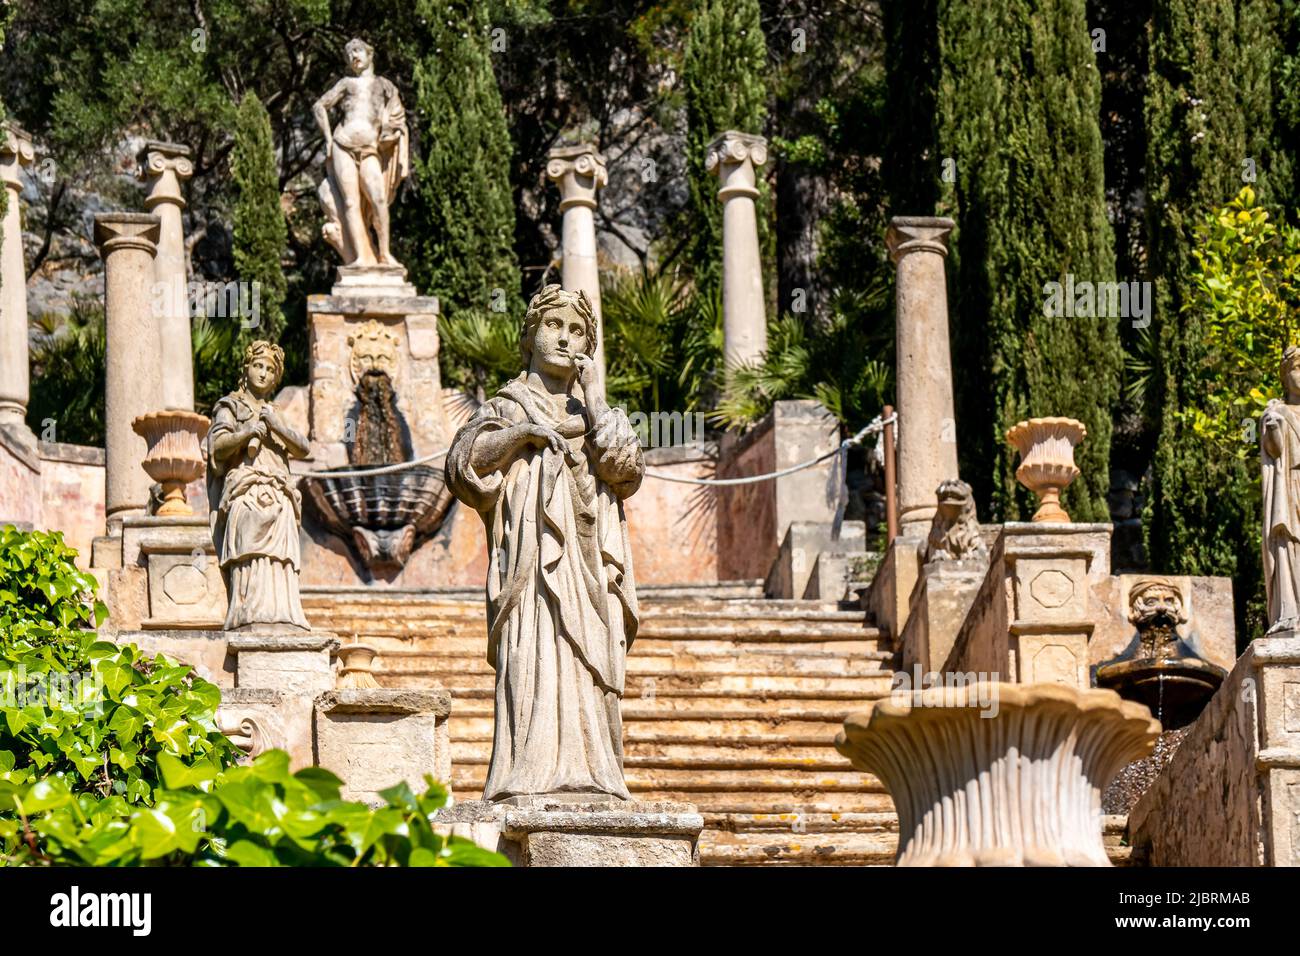 Female statue in front of a staircase called Apollo Staircase lined with gargoyles and amphorae next to cypresses and ivy leads to an Apollo monument. Stock Photo